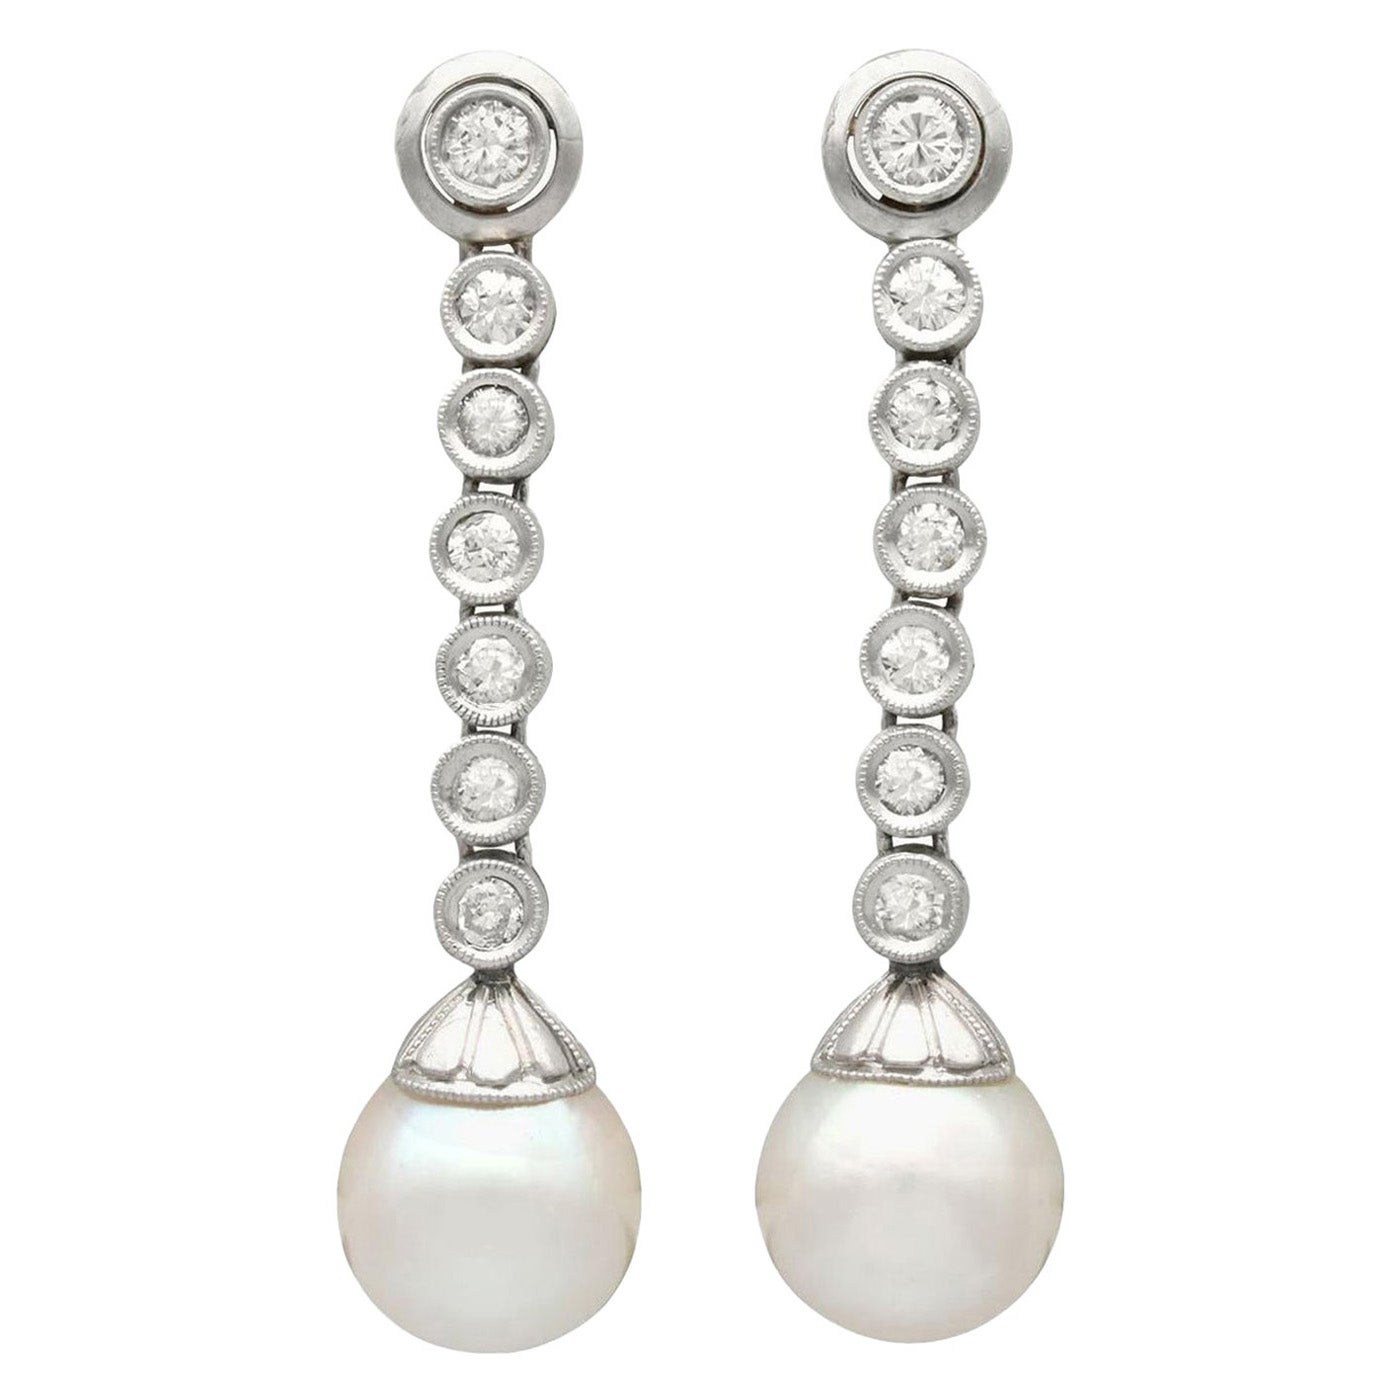 1960s 1.05 Carat Diamond and Cultured Pearl White Gold Drop Earrings at ...